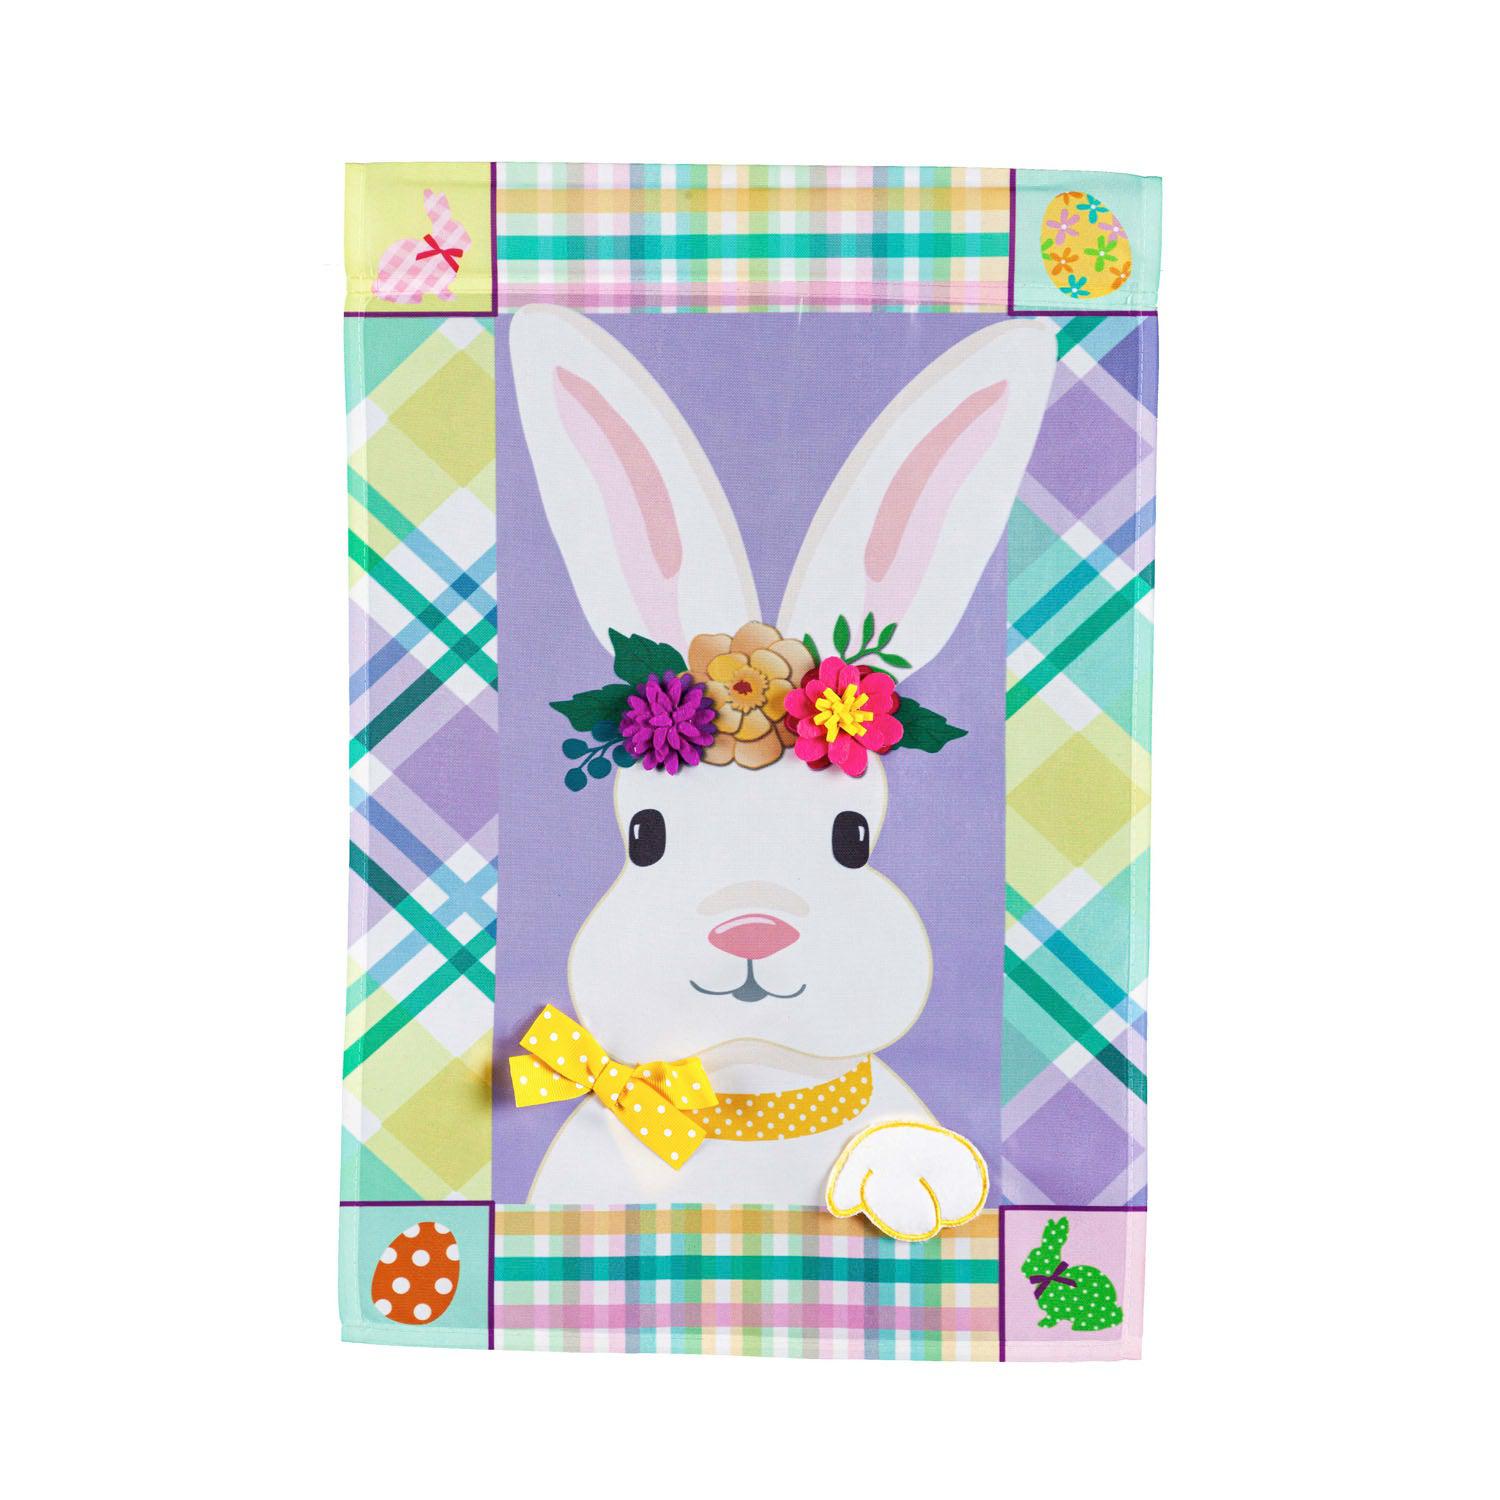 The Bunny Patterned Border garden flag features a white bunny with a crown of flowers and yellow ribbon with a multi-colored and patterned border. 